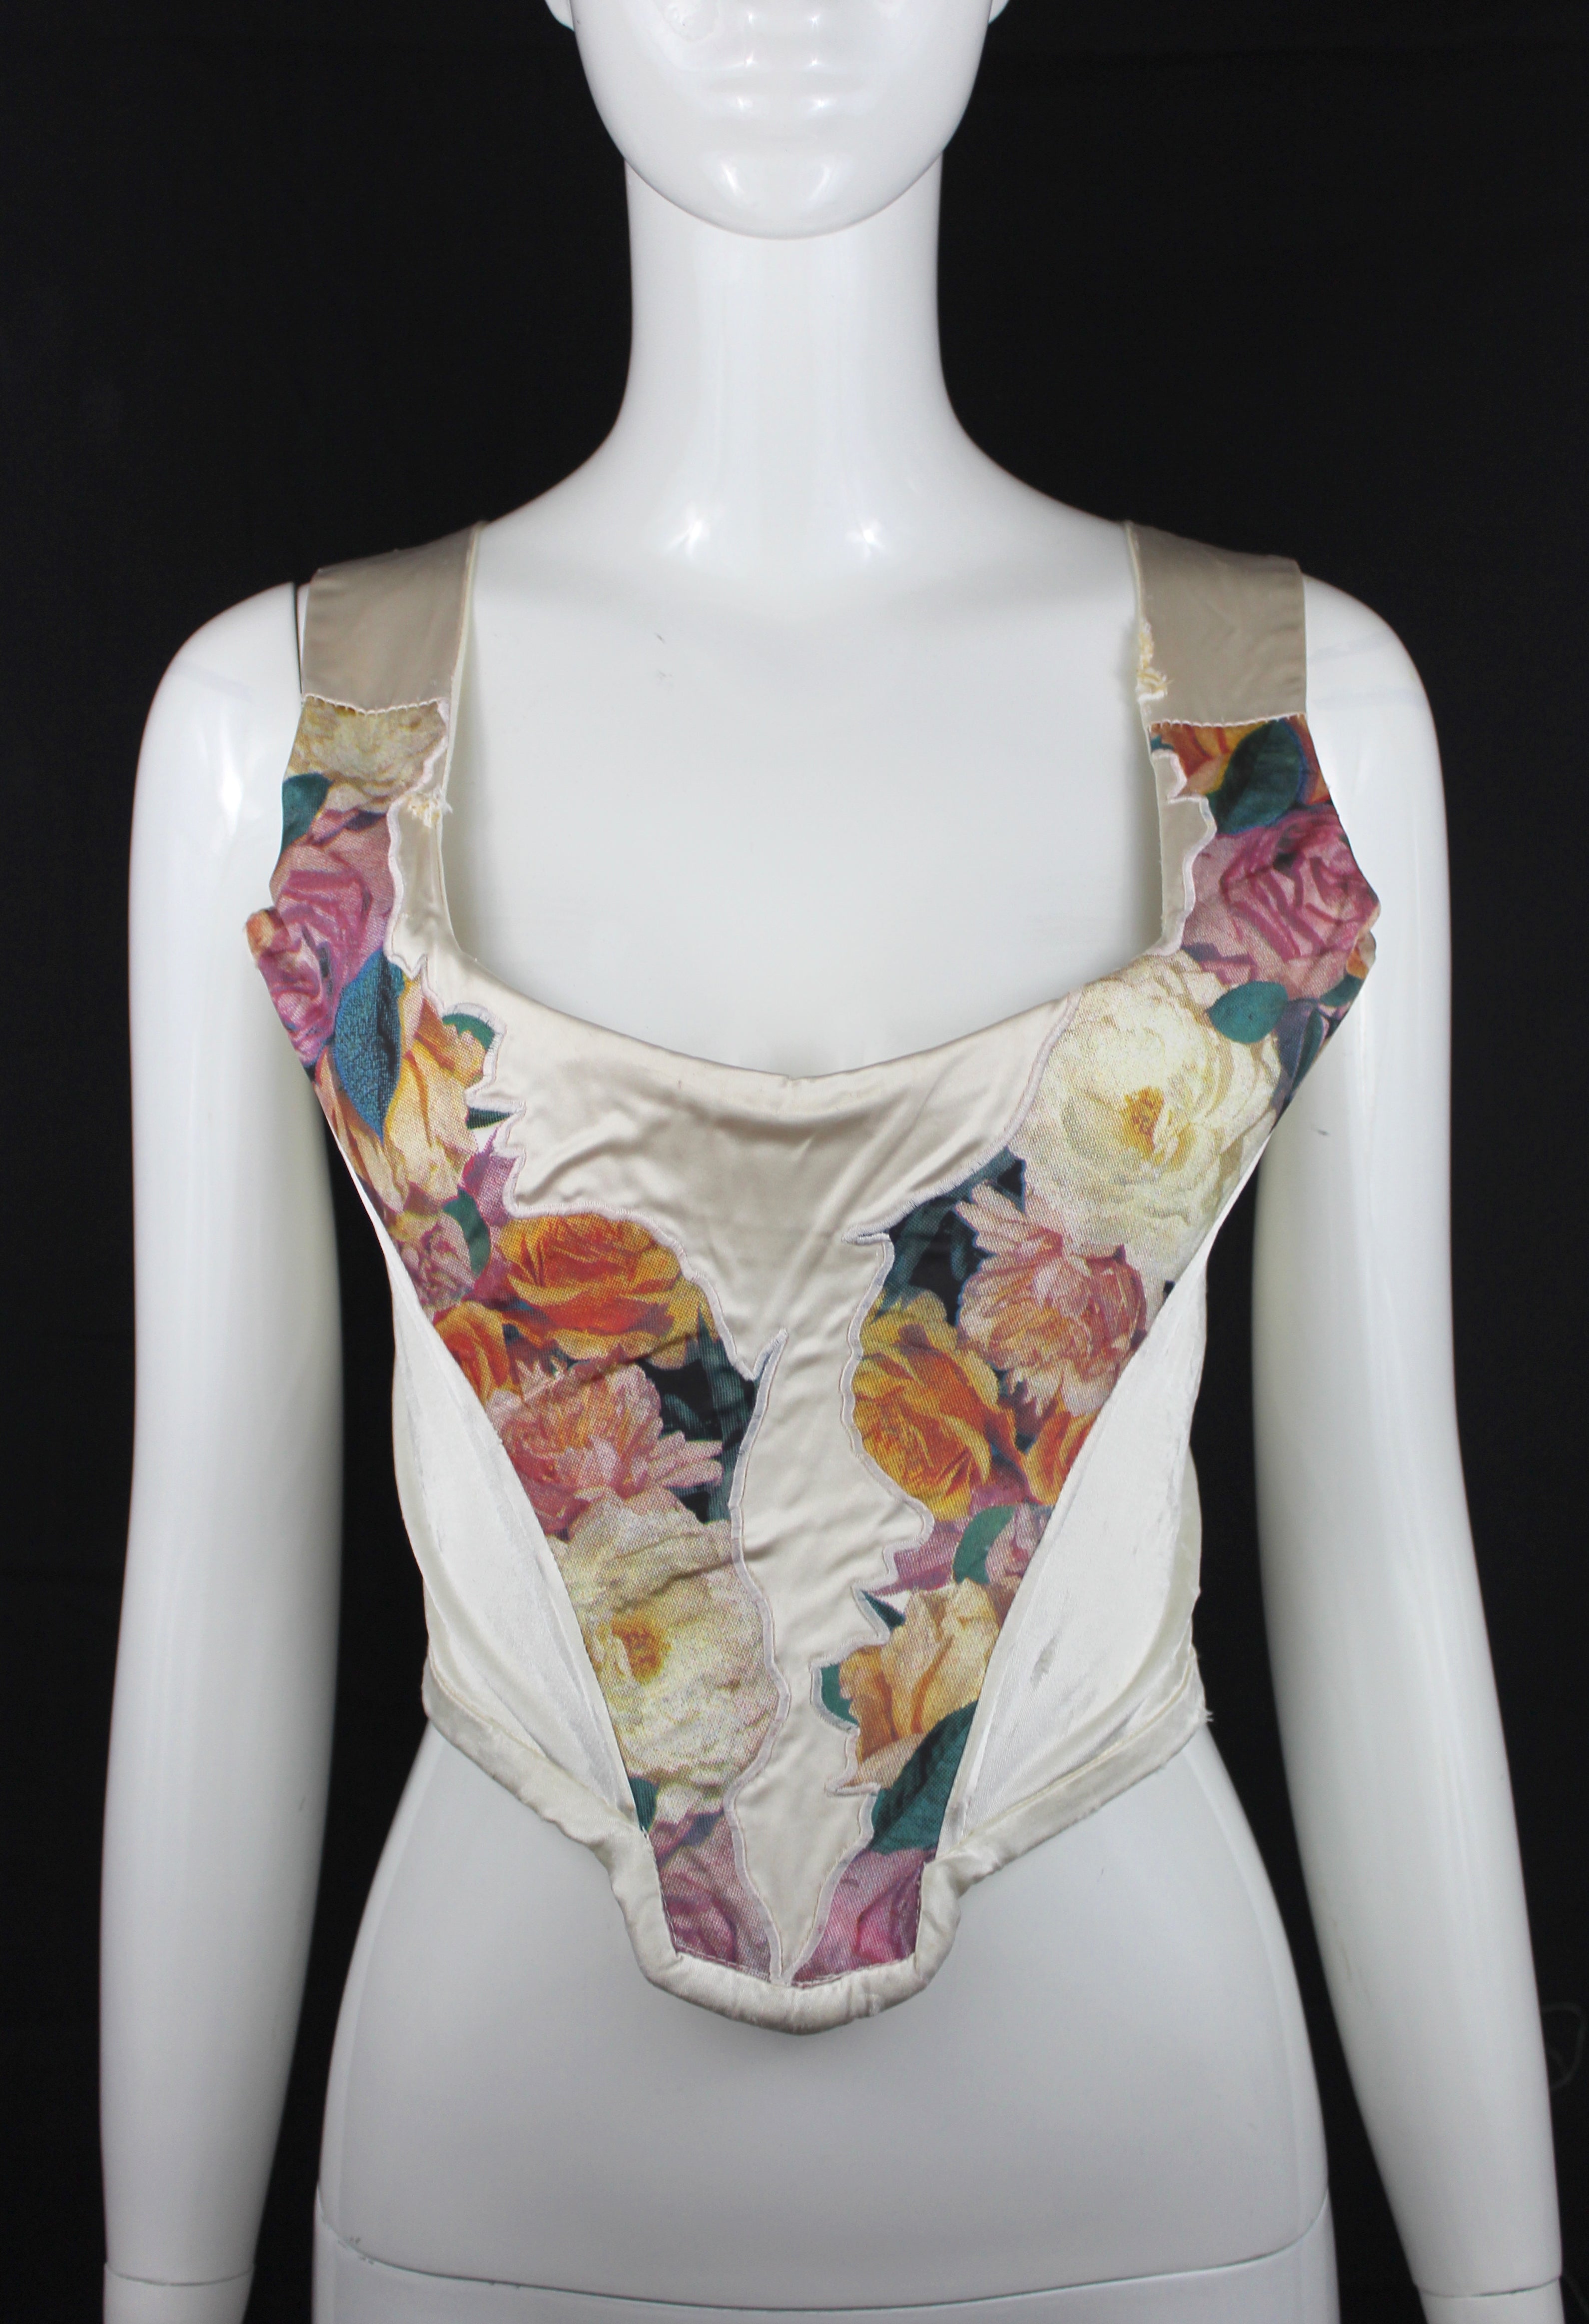 Vivienne Westwood Corsets, the free fashion exhibition to discover